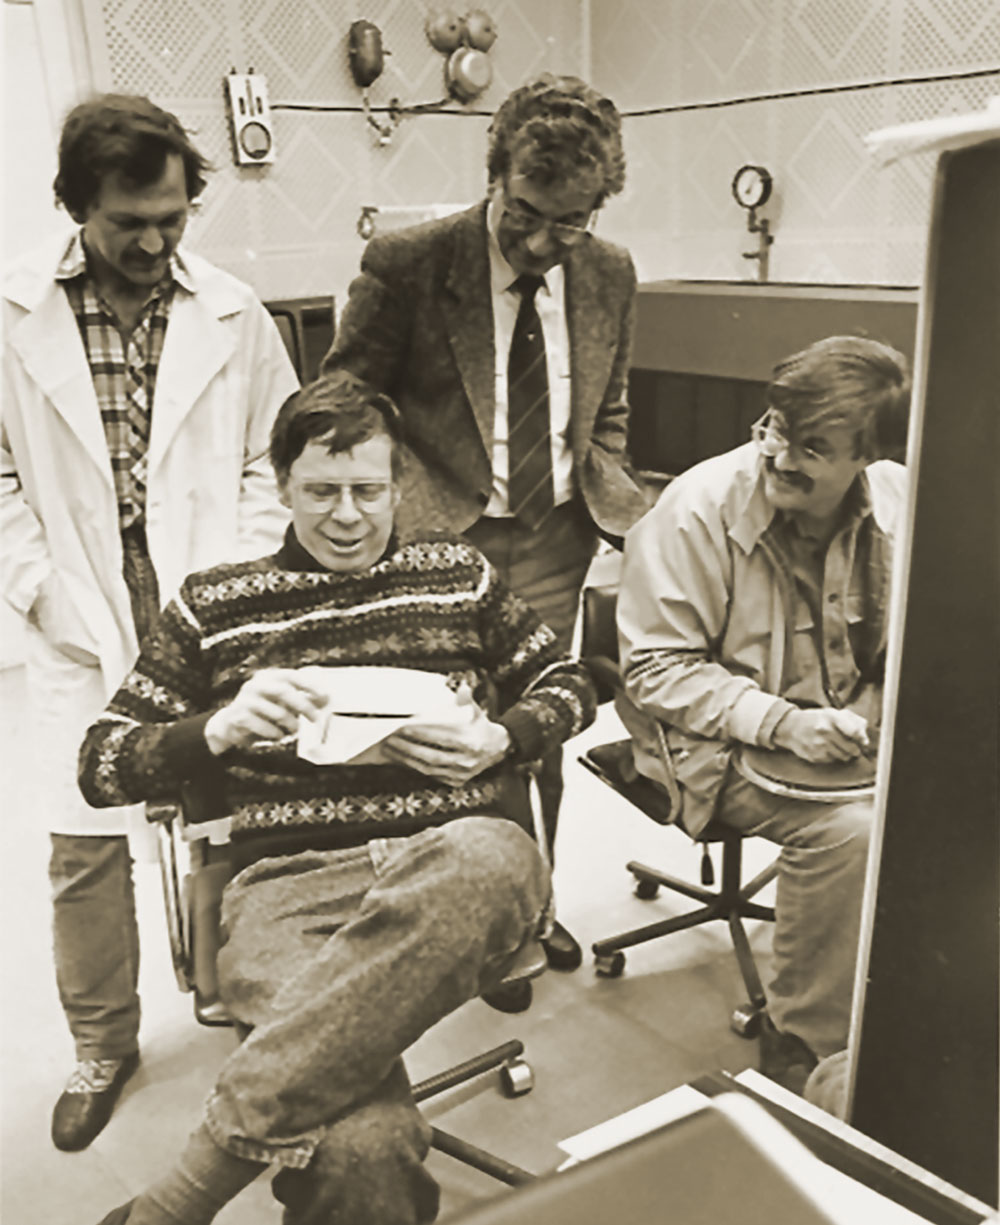 Archival photo of 4 scientists perusing paperwork and discussing their research.